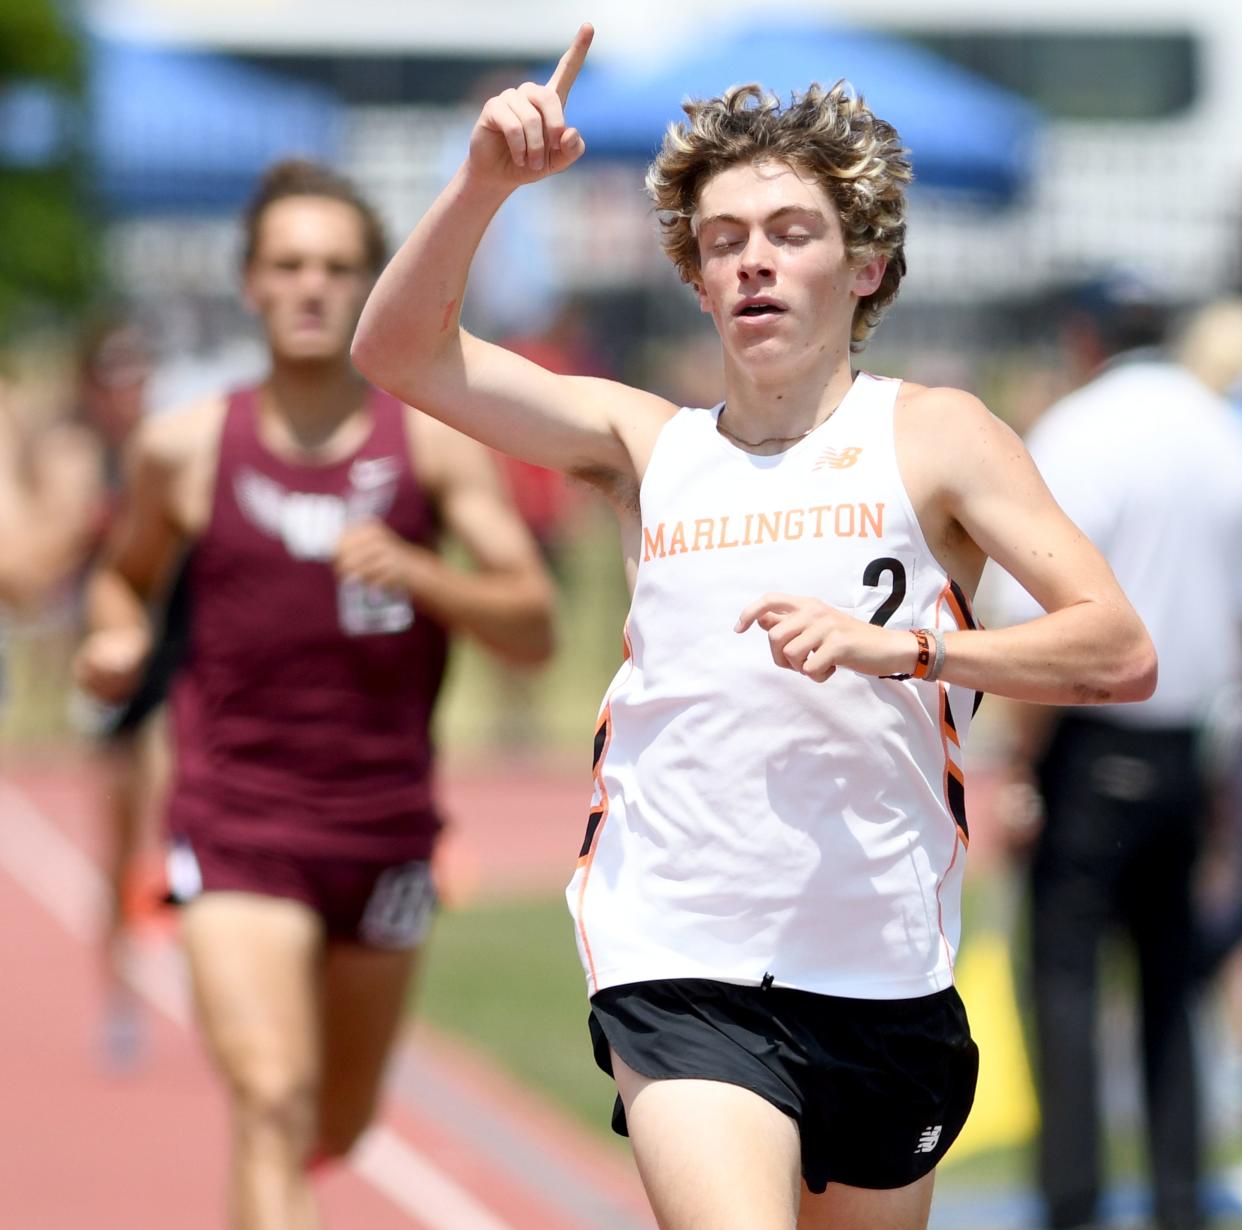 Marlington's Colin Cernansky wins a Division II state championship in the 1,600 meters last season.